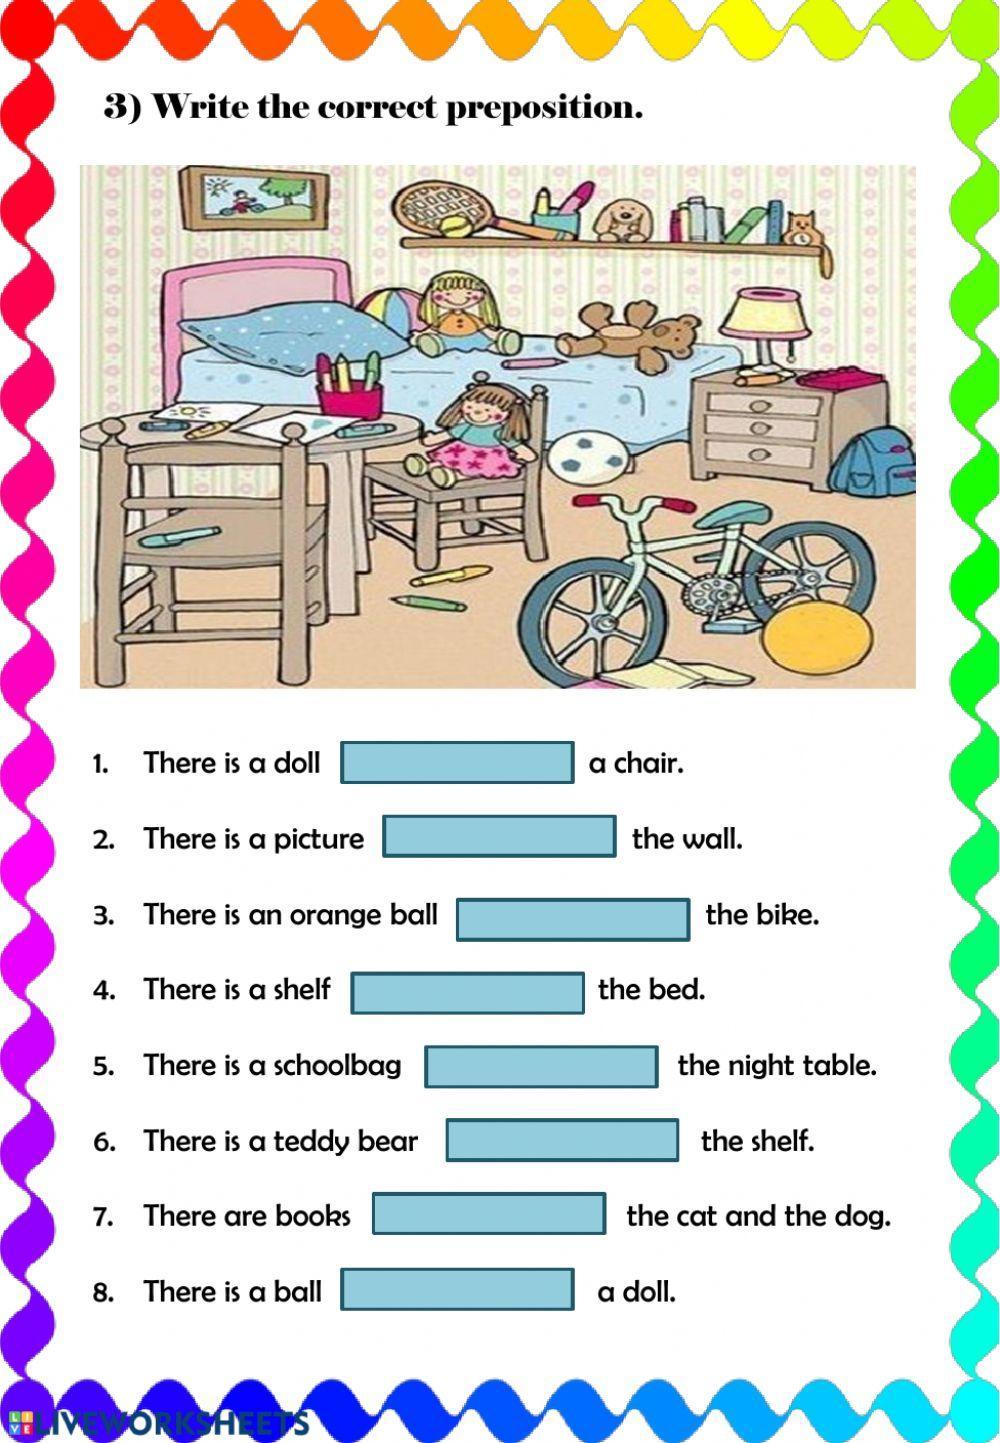 Prepositions of Place - 4 activities